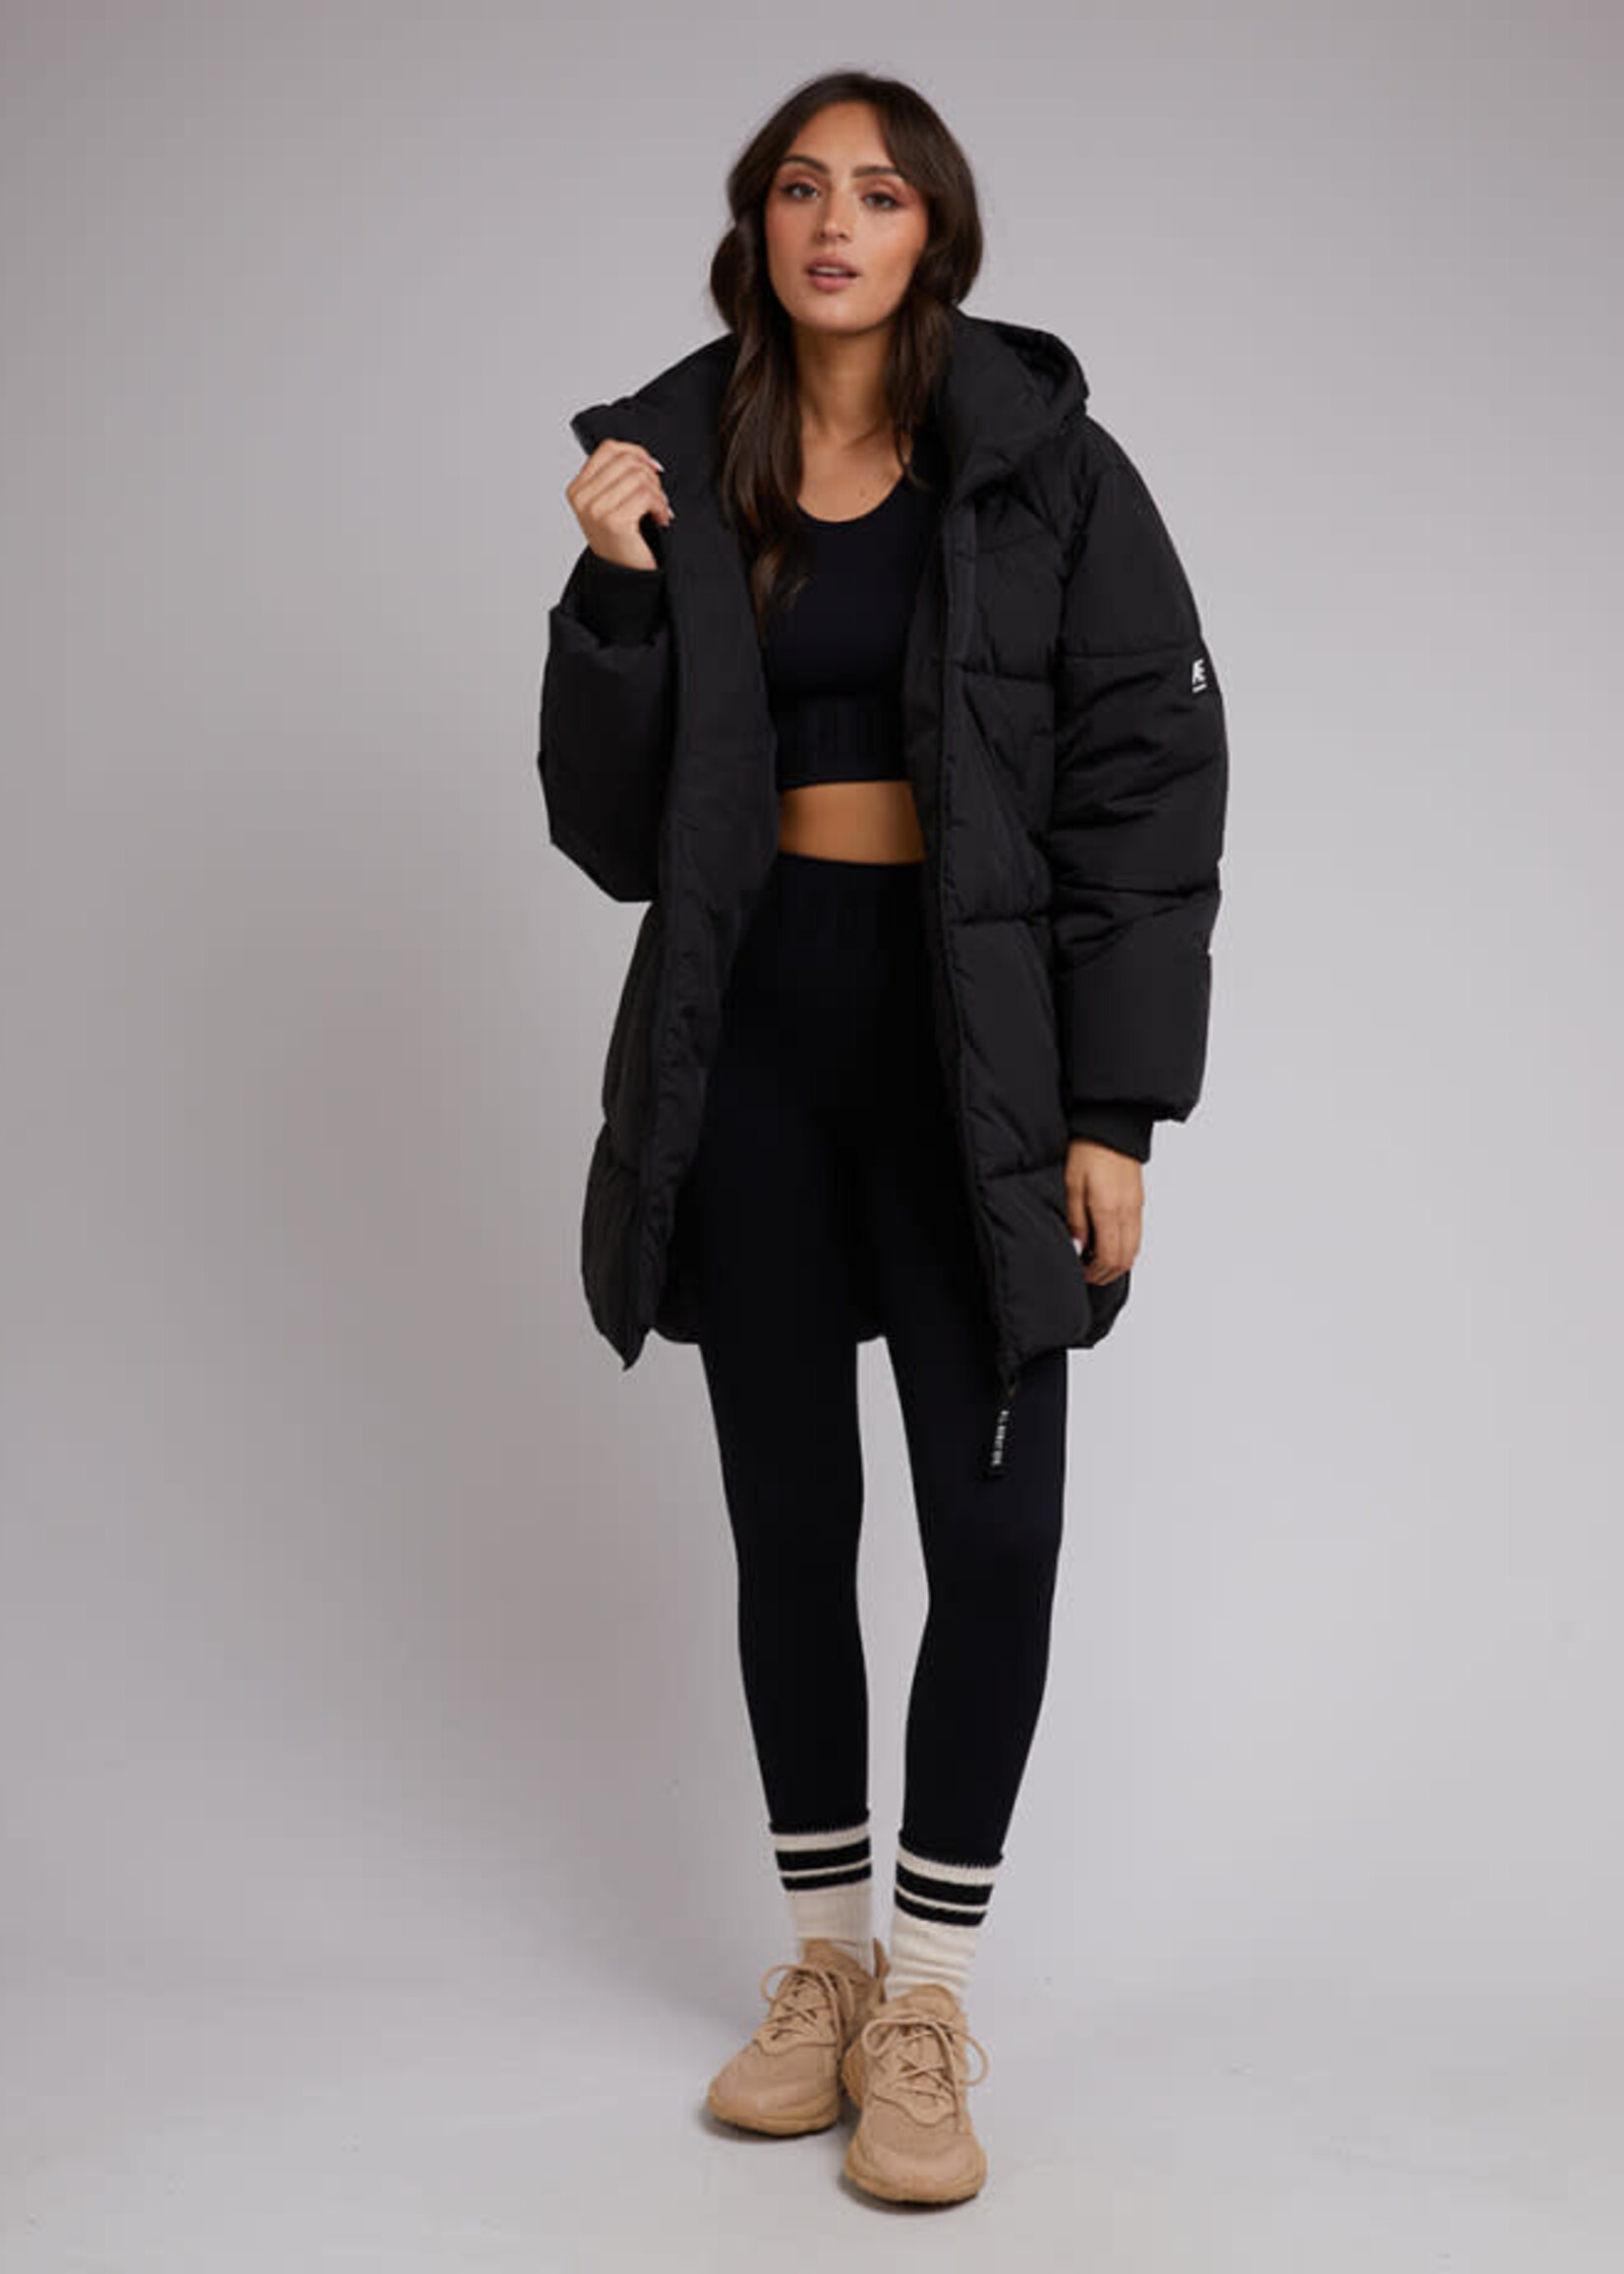 All About Eve Remi Luxe Midi Puffer